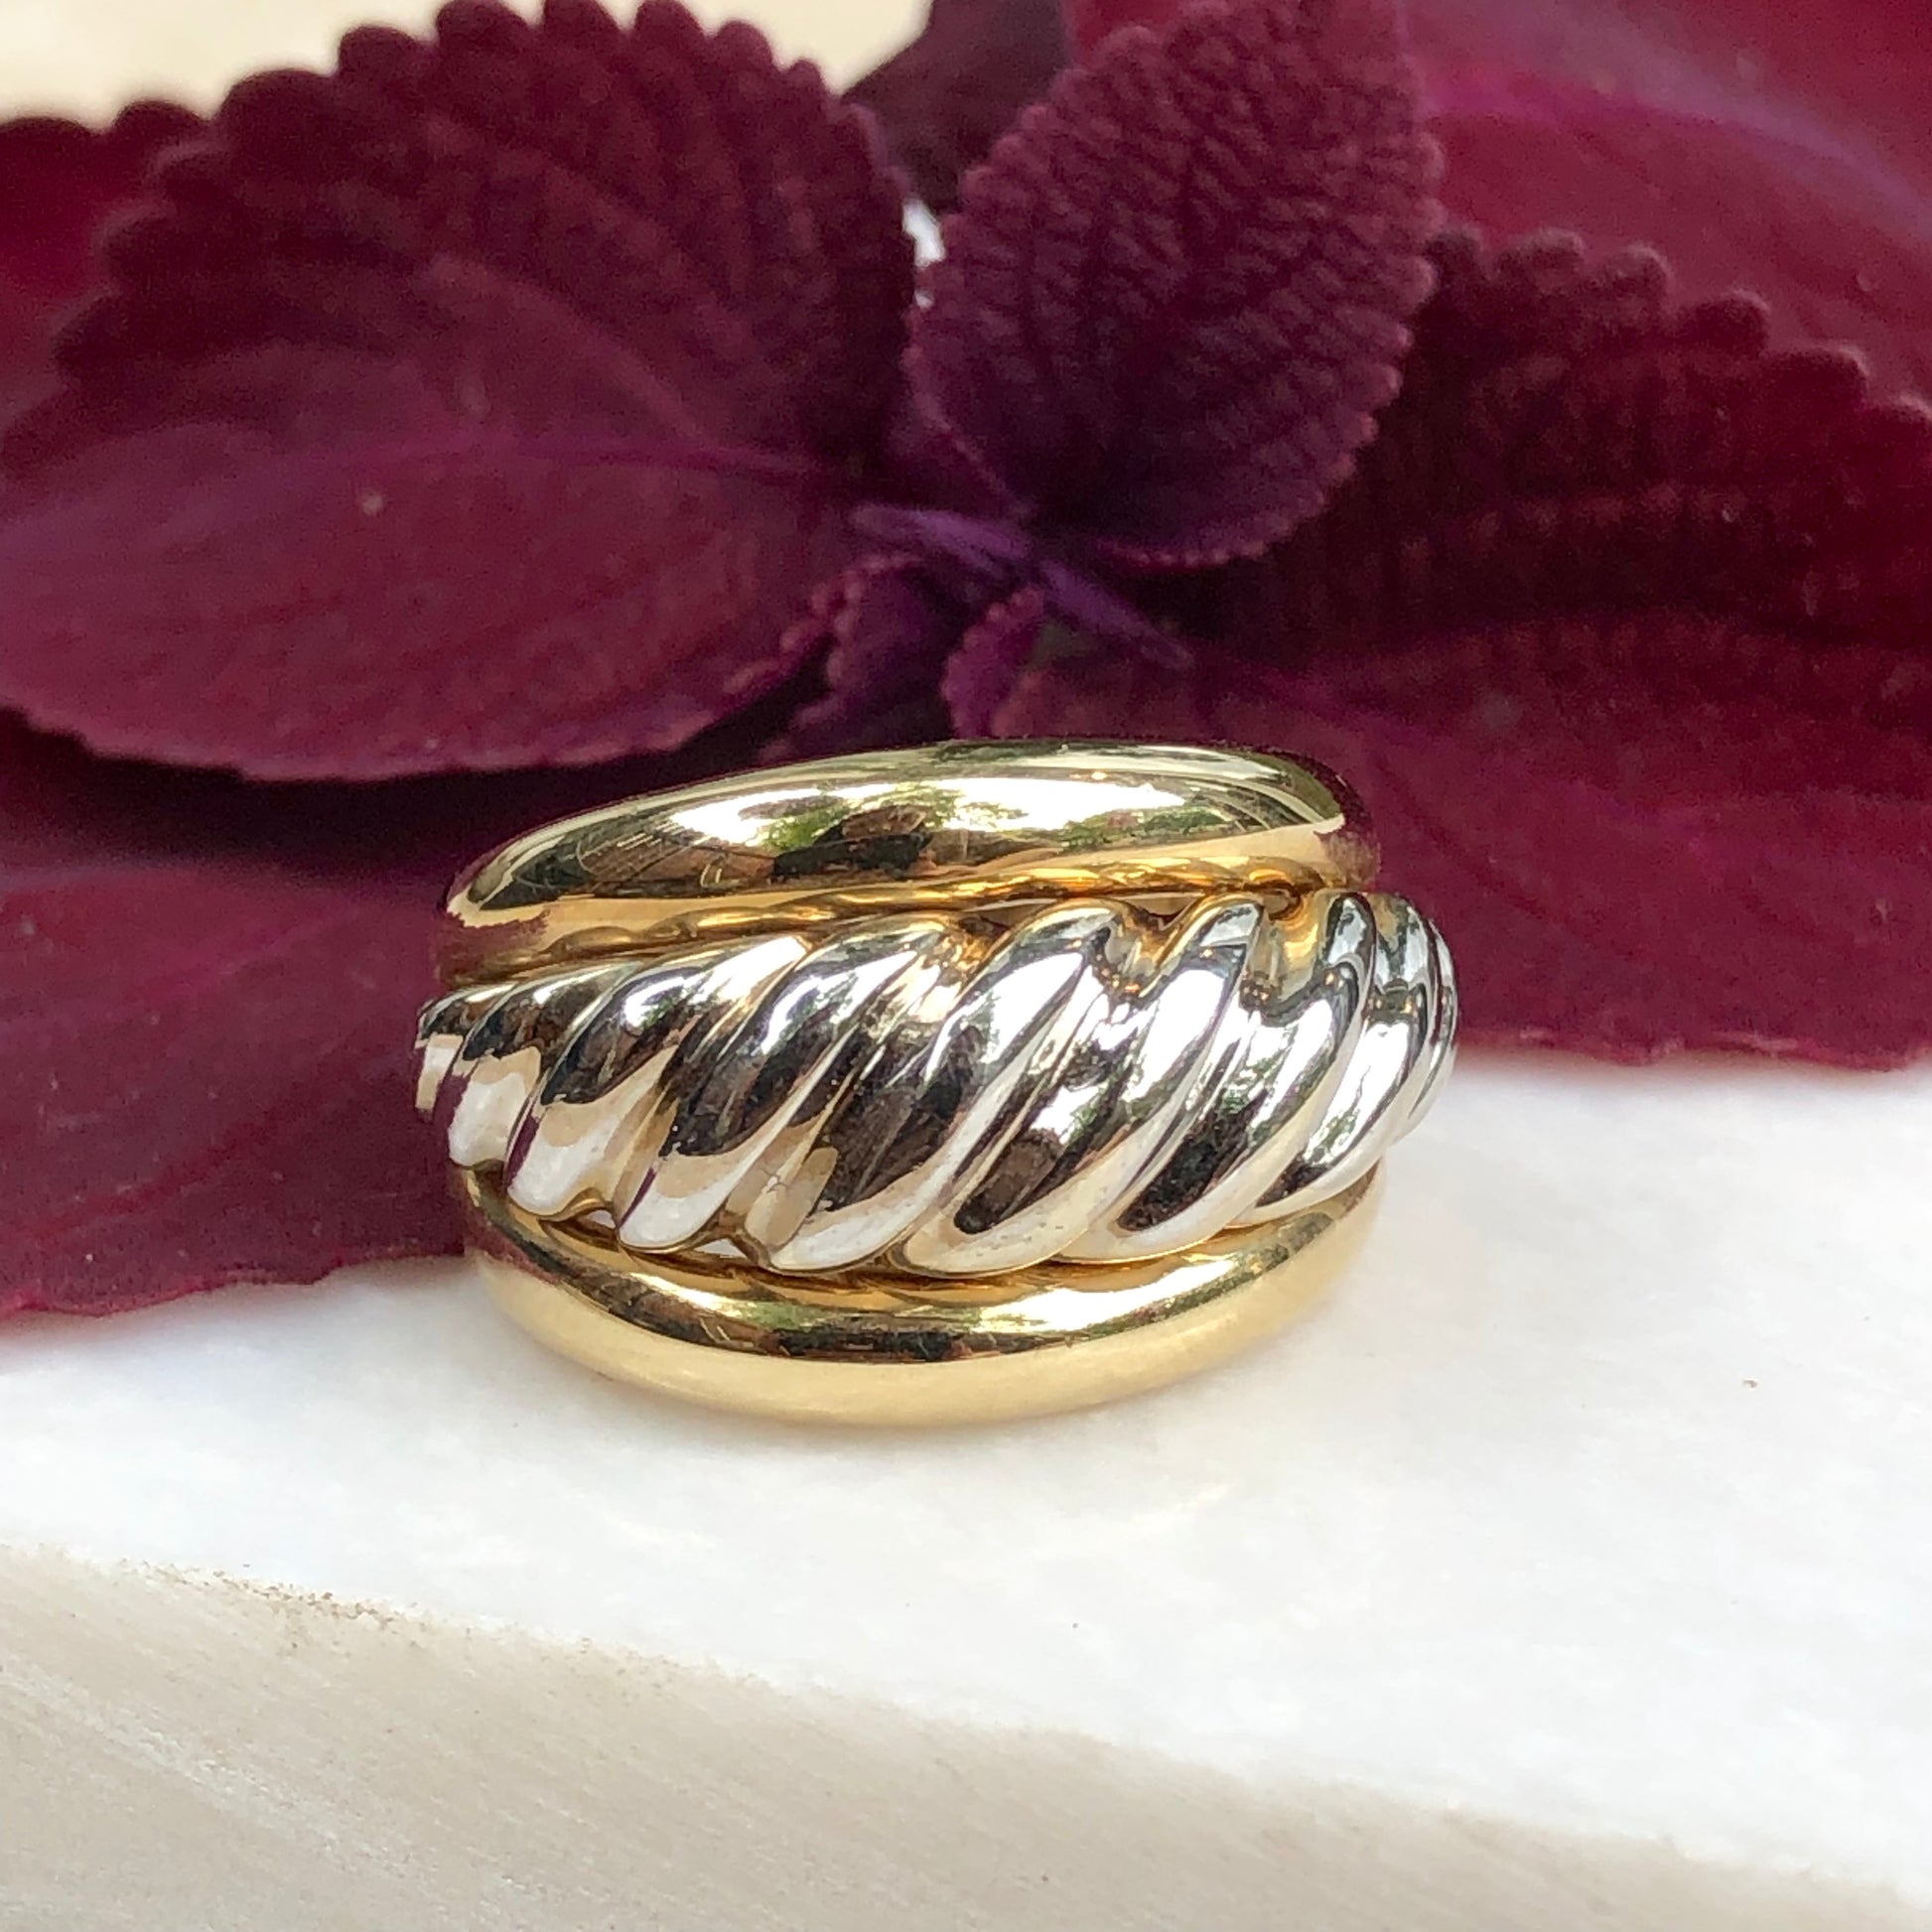 14KT Yellow Gold + White Gold Ribbed Cigar Band Ring Size 7.5, 14KT Yellow Gold + White Gold Ribbed Cigar Band Ring Size 7.5 - Legacy Saint Jewelry